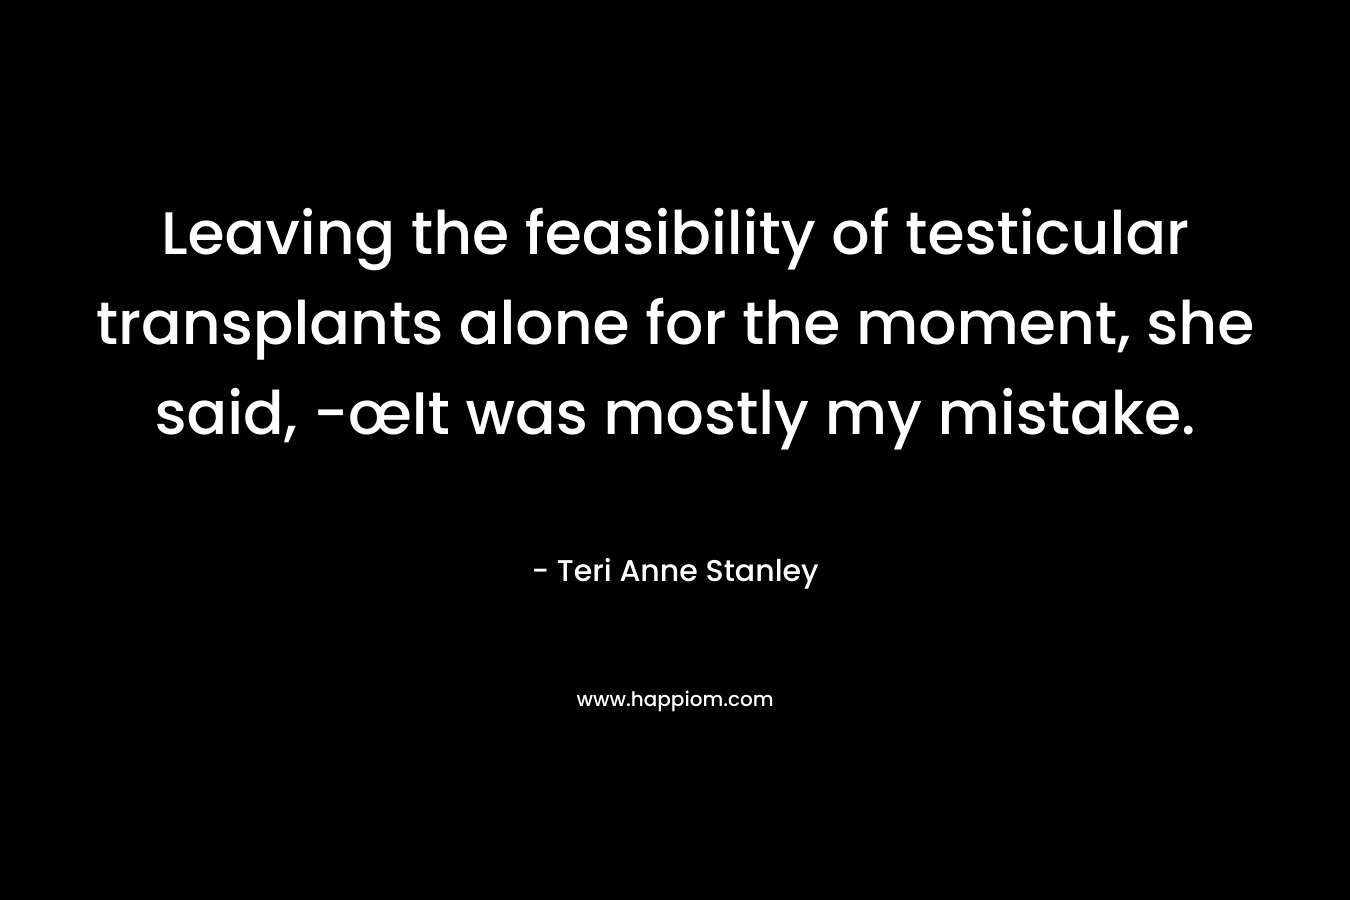 Leaving the feasibility of testicular transplants alone for the moment, she said, -œIt was mostly my mistake. – Teri Anne Stanley